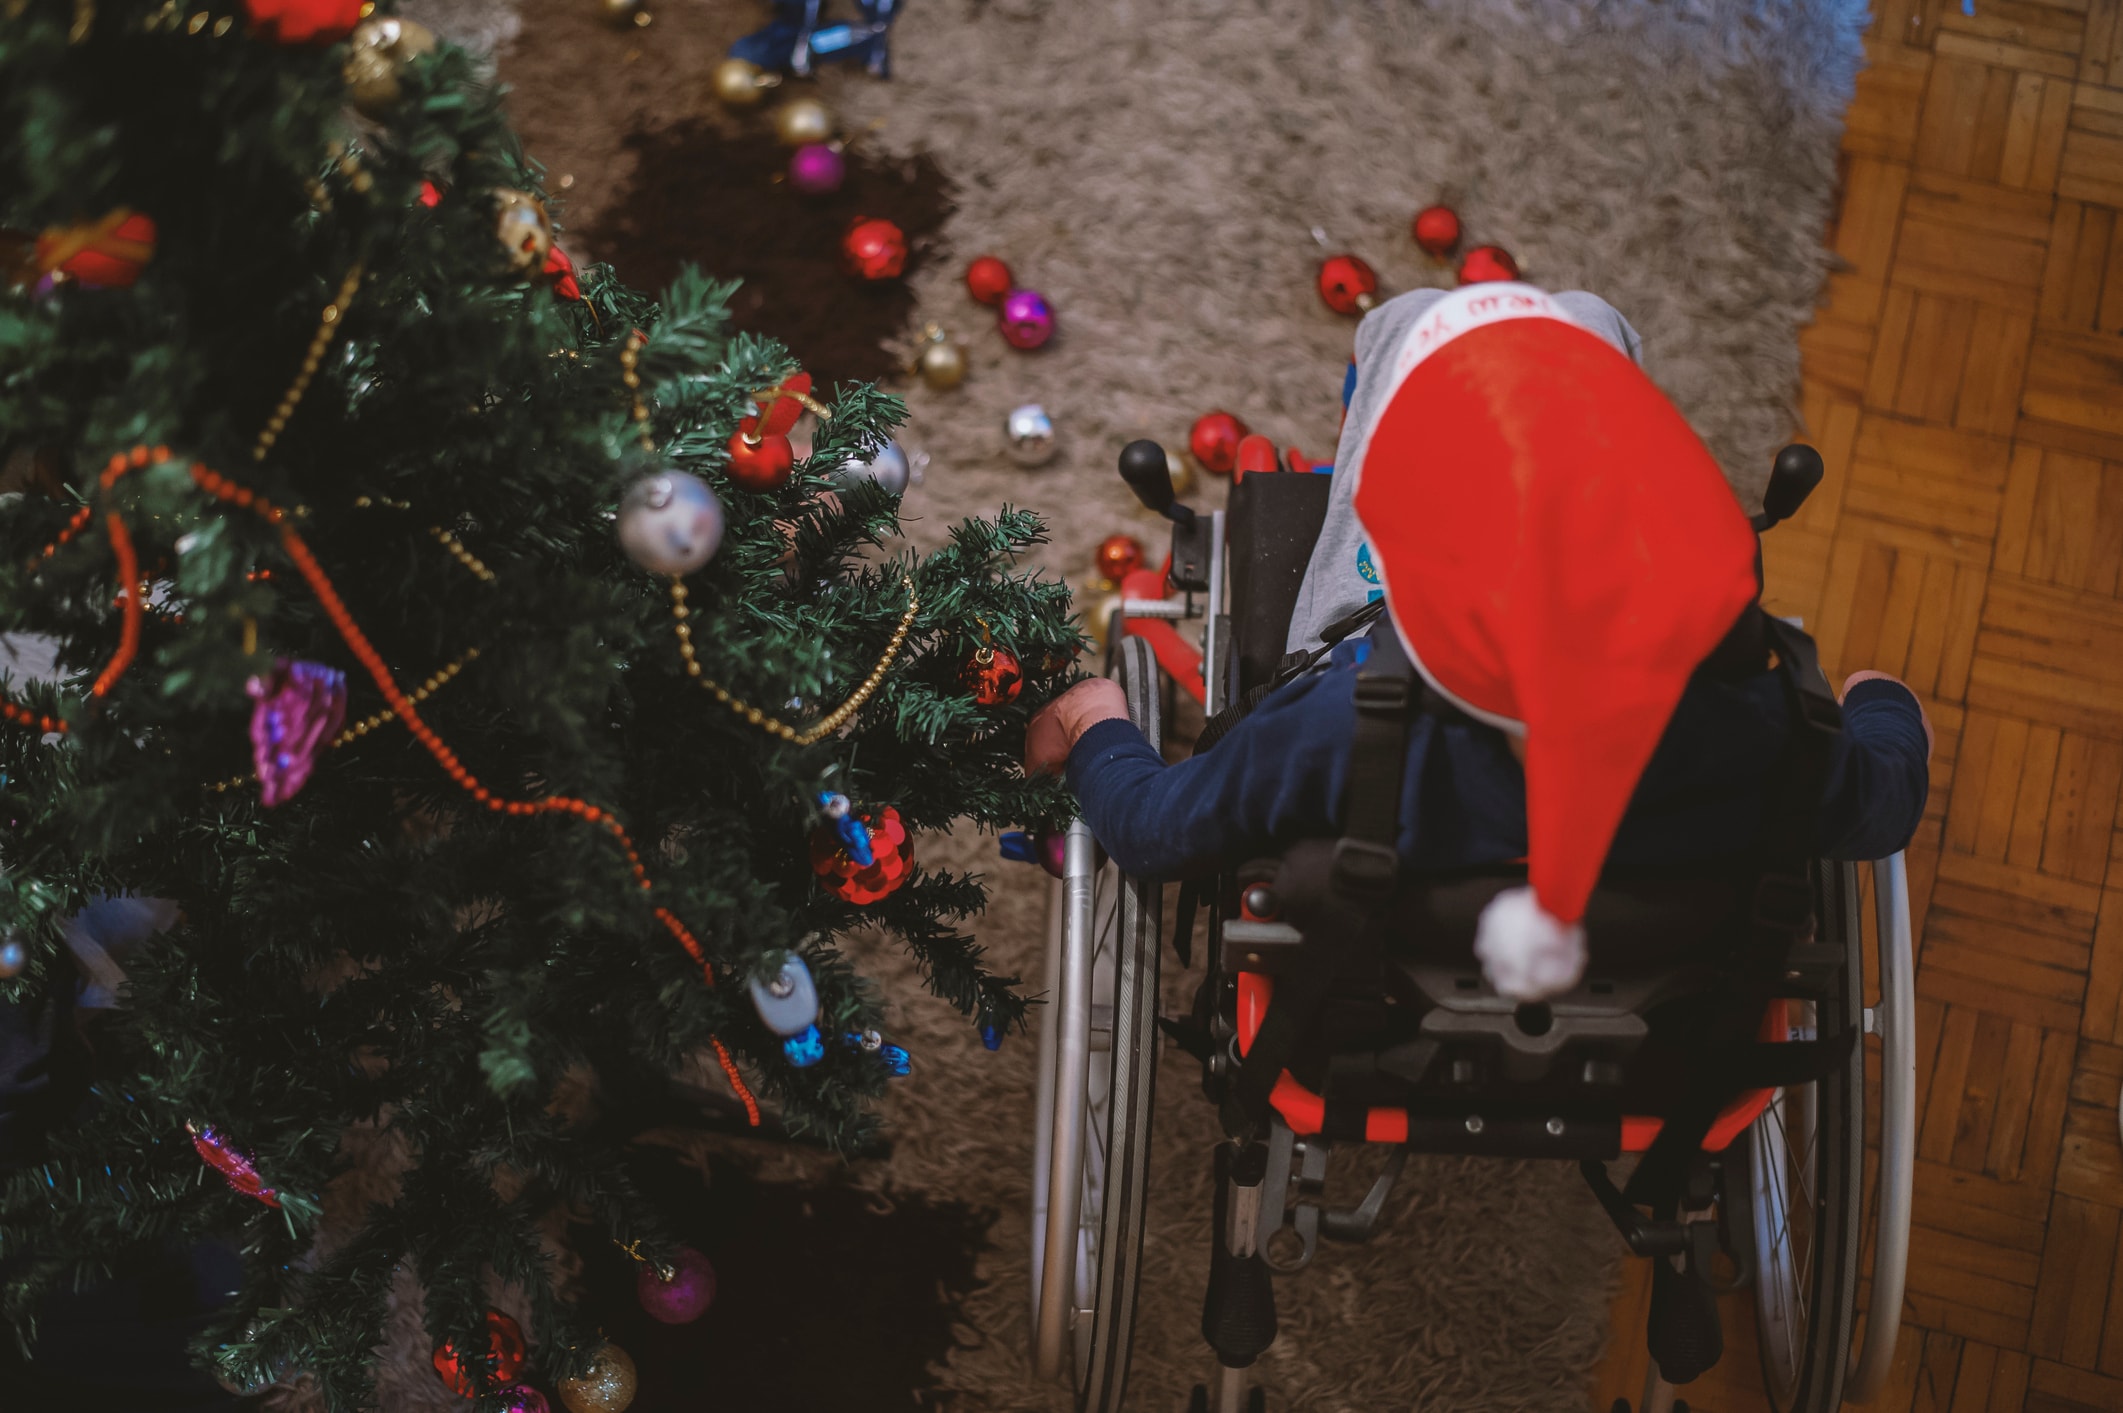 5 ways to make the holidays happier for children with special needs